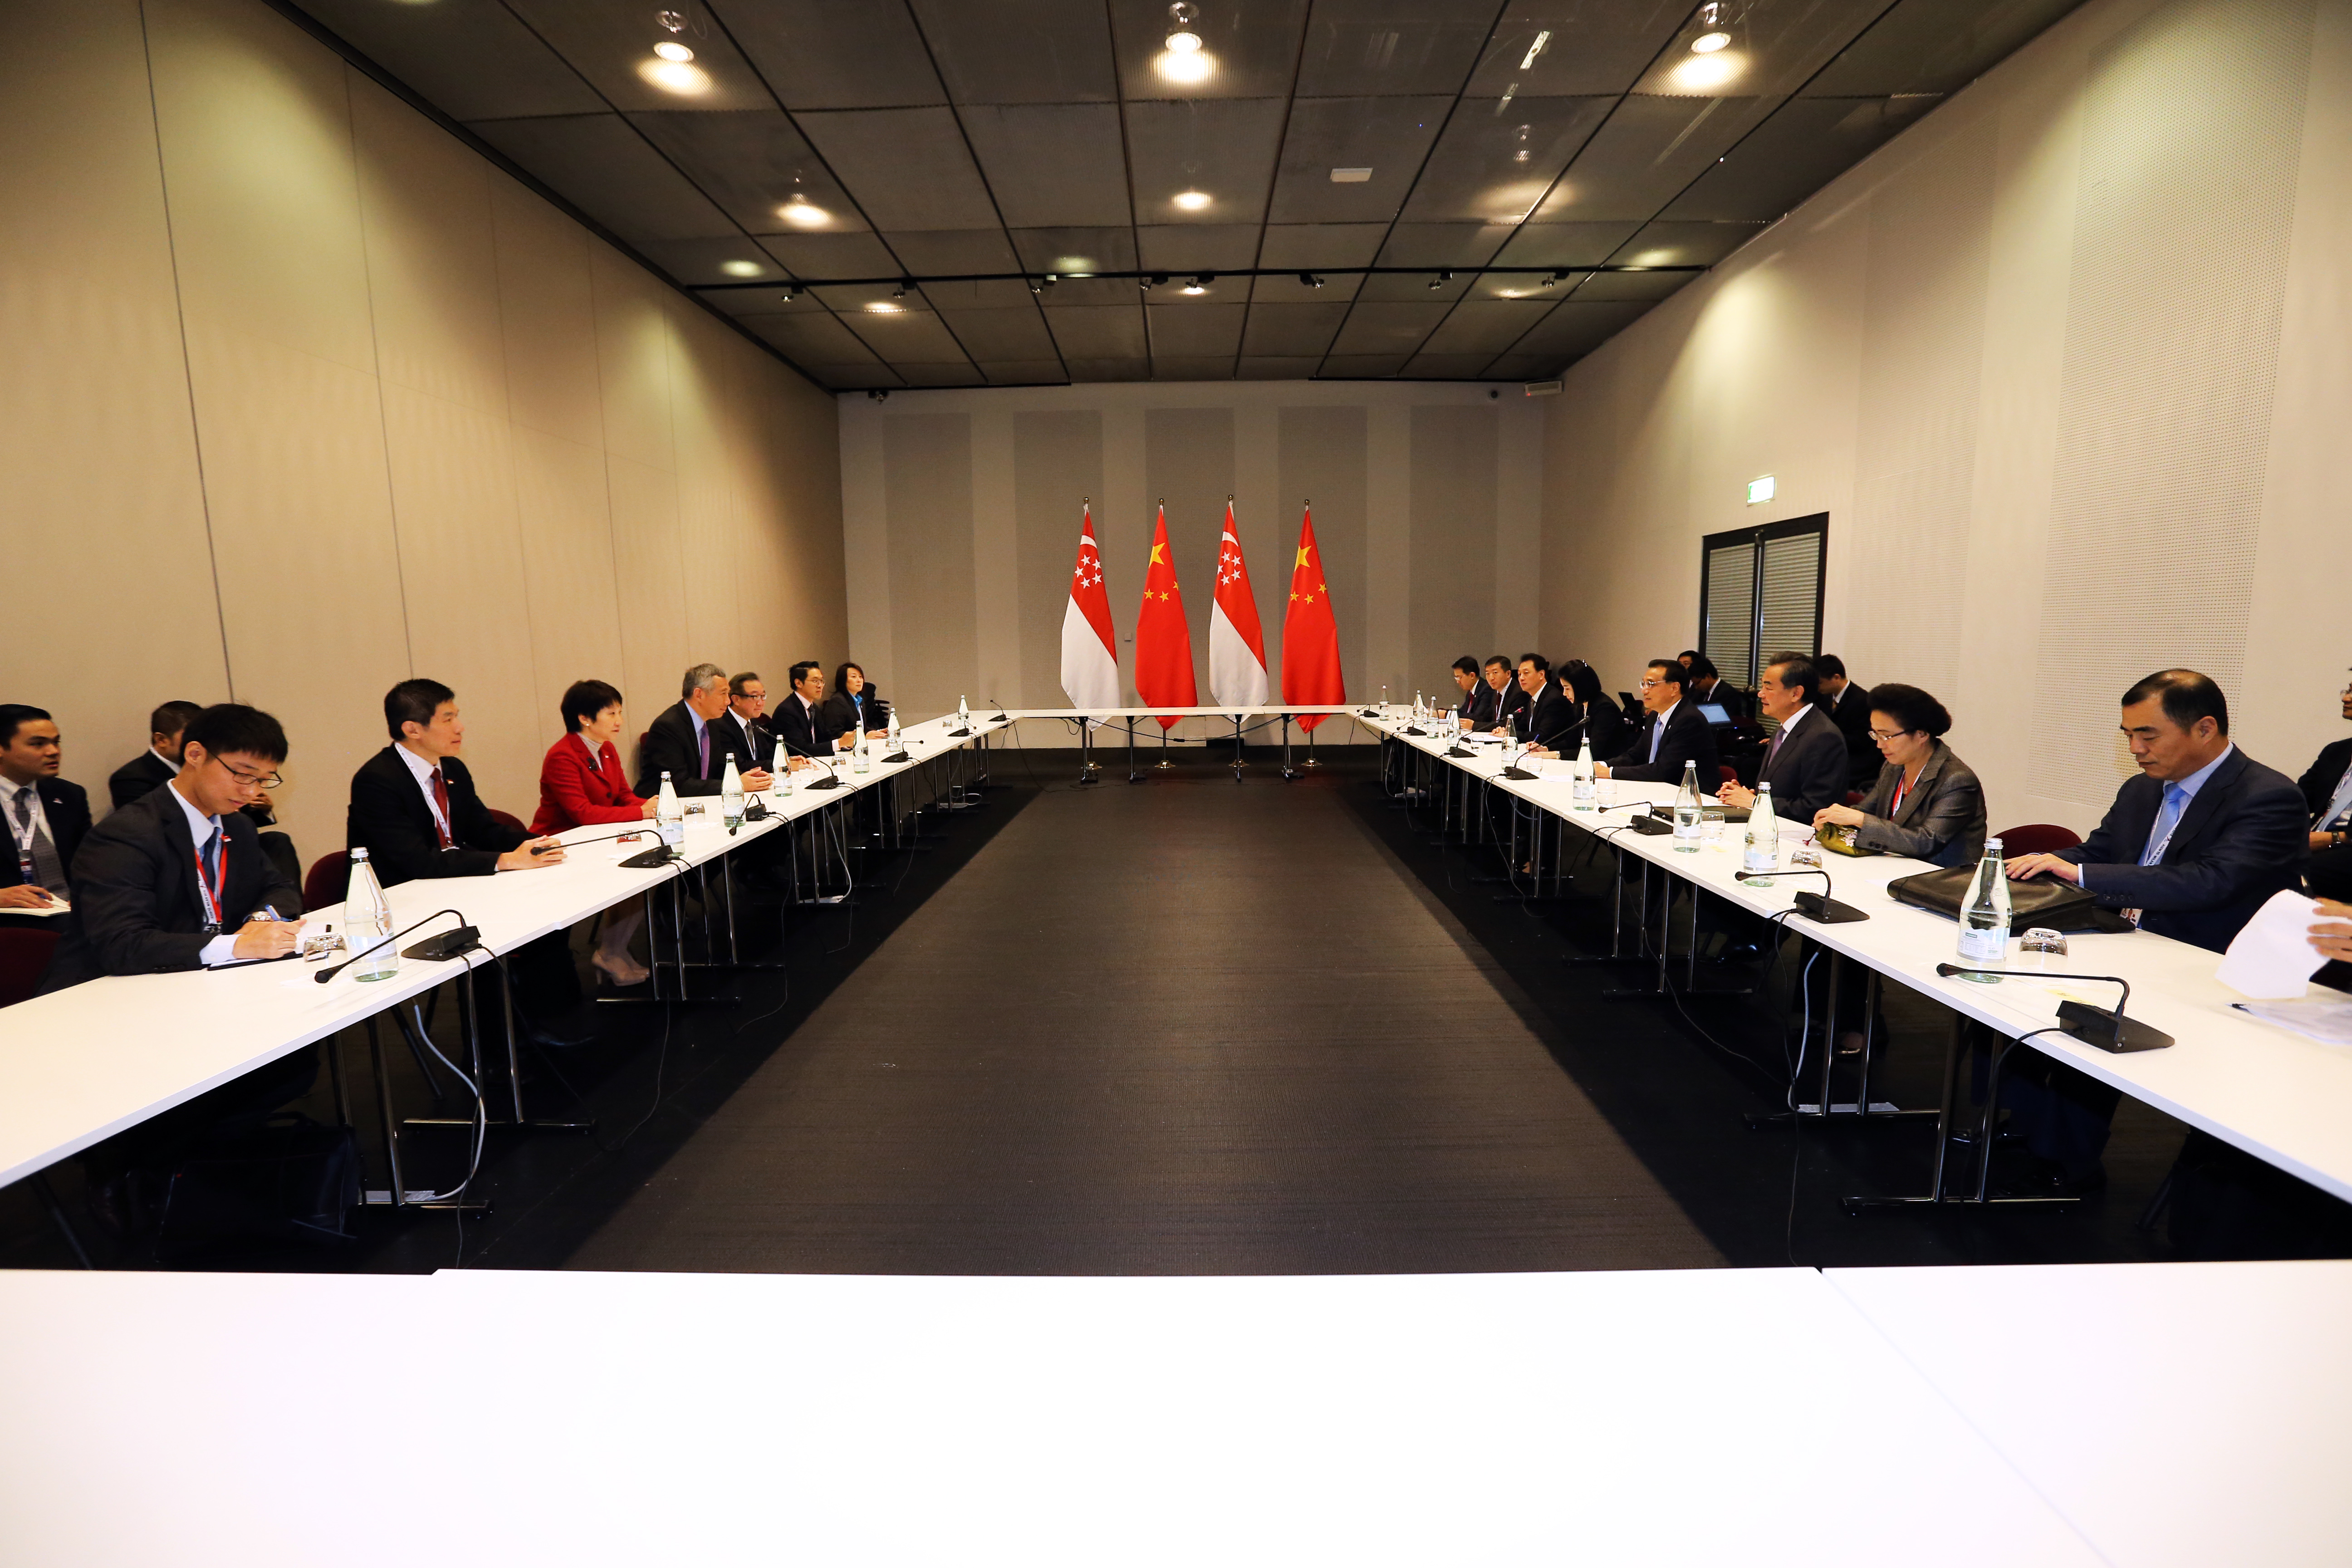 10th Summit of the Asia-Europe Meeting (ASEM) - Oct 2014 (PMO Photo by Alex Qiu)